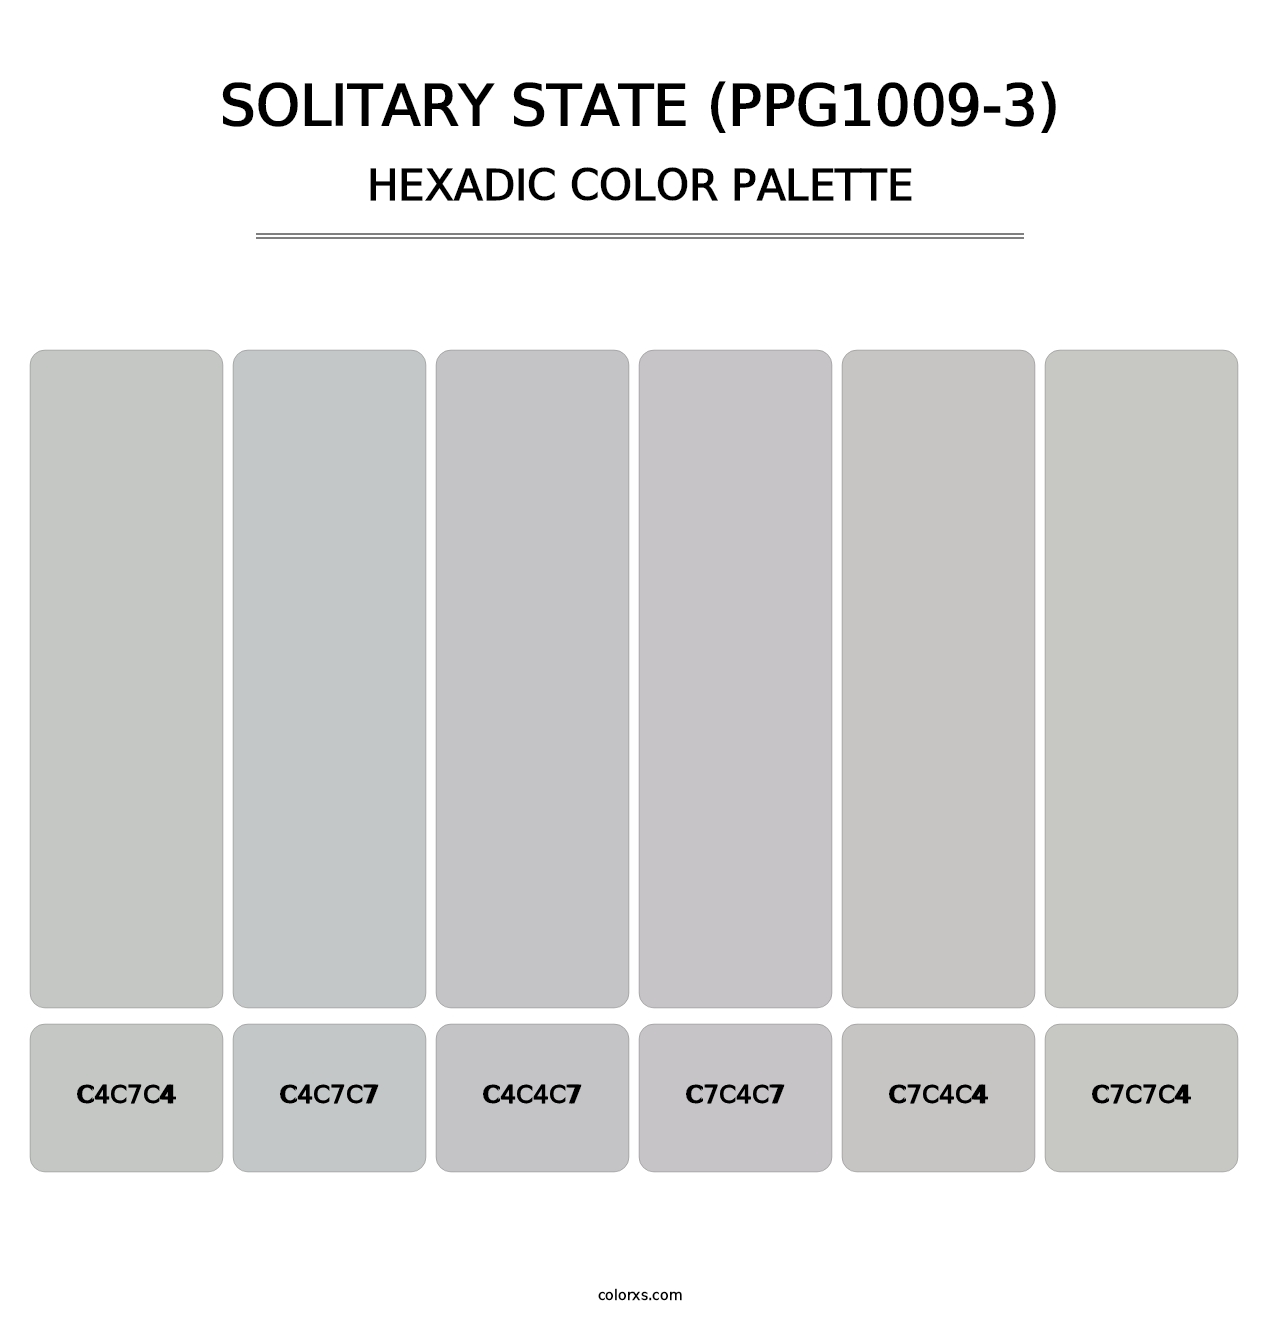 Solitary State (PPG1009-3) - Hexadic Color Palette